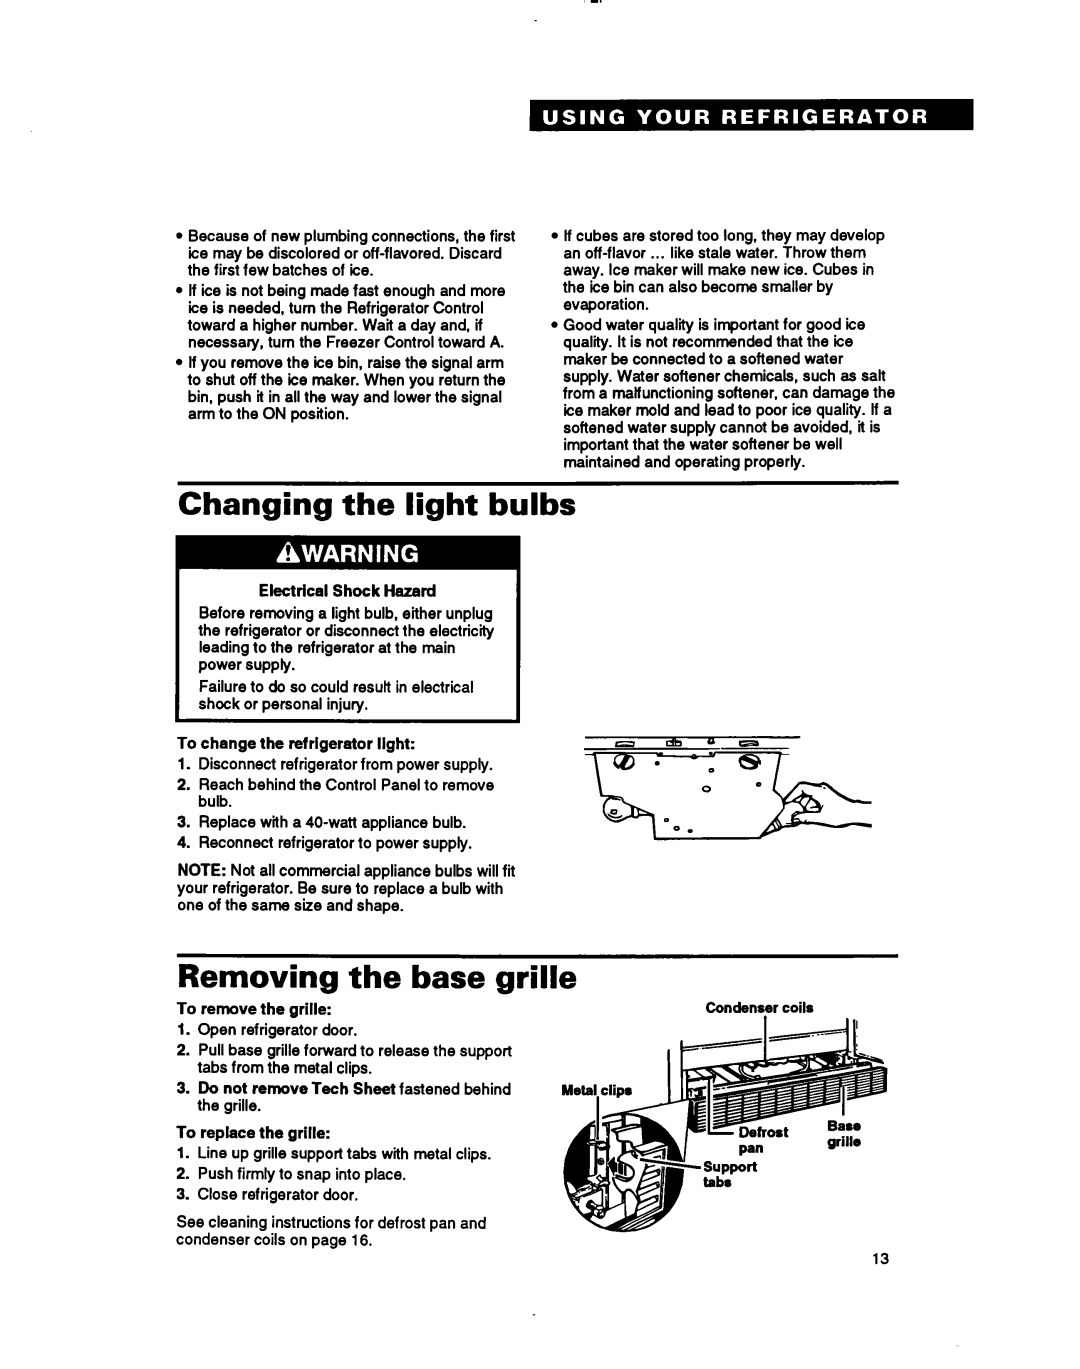 Whirlpool RT18EK, RTZOCK, A RT18BM important safety instructions Changing the light bulbs, Removing the base grille 